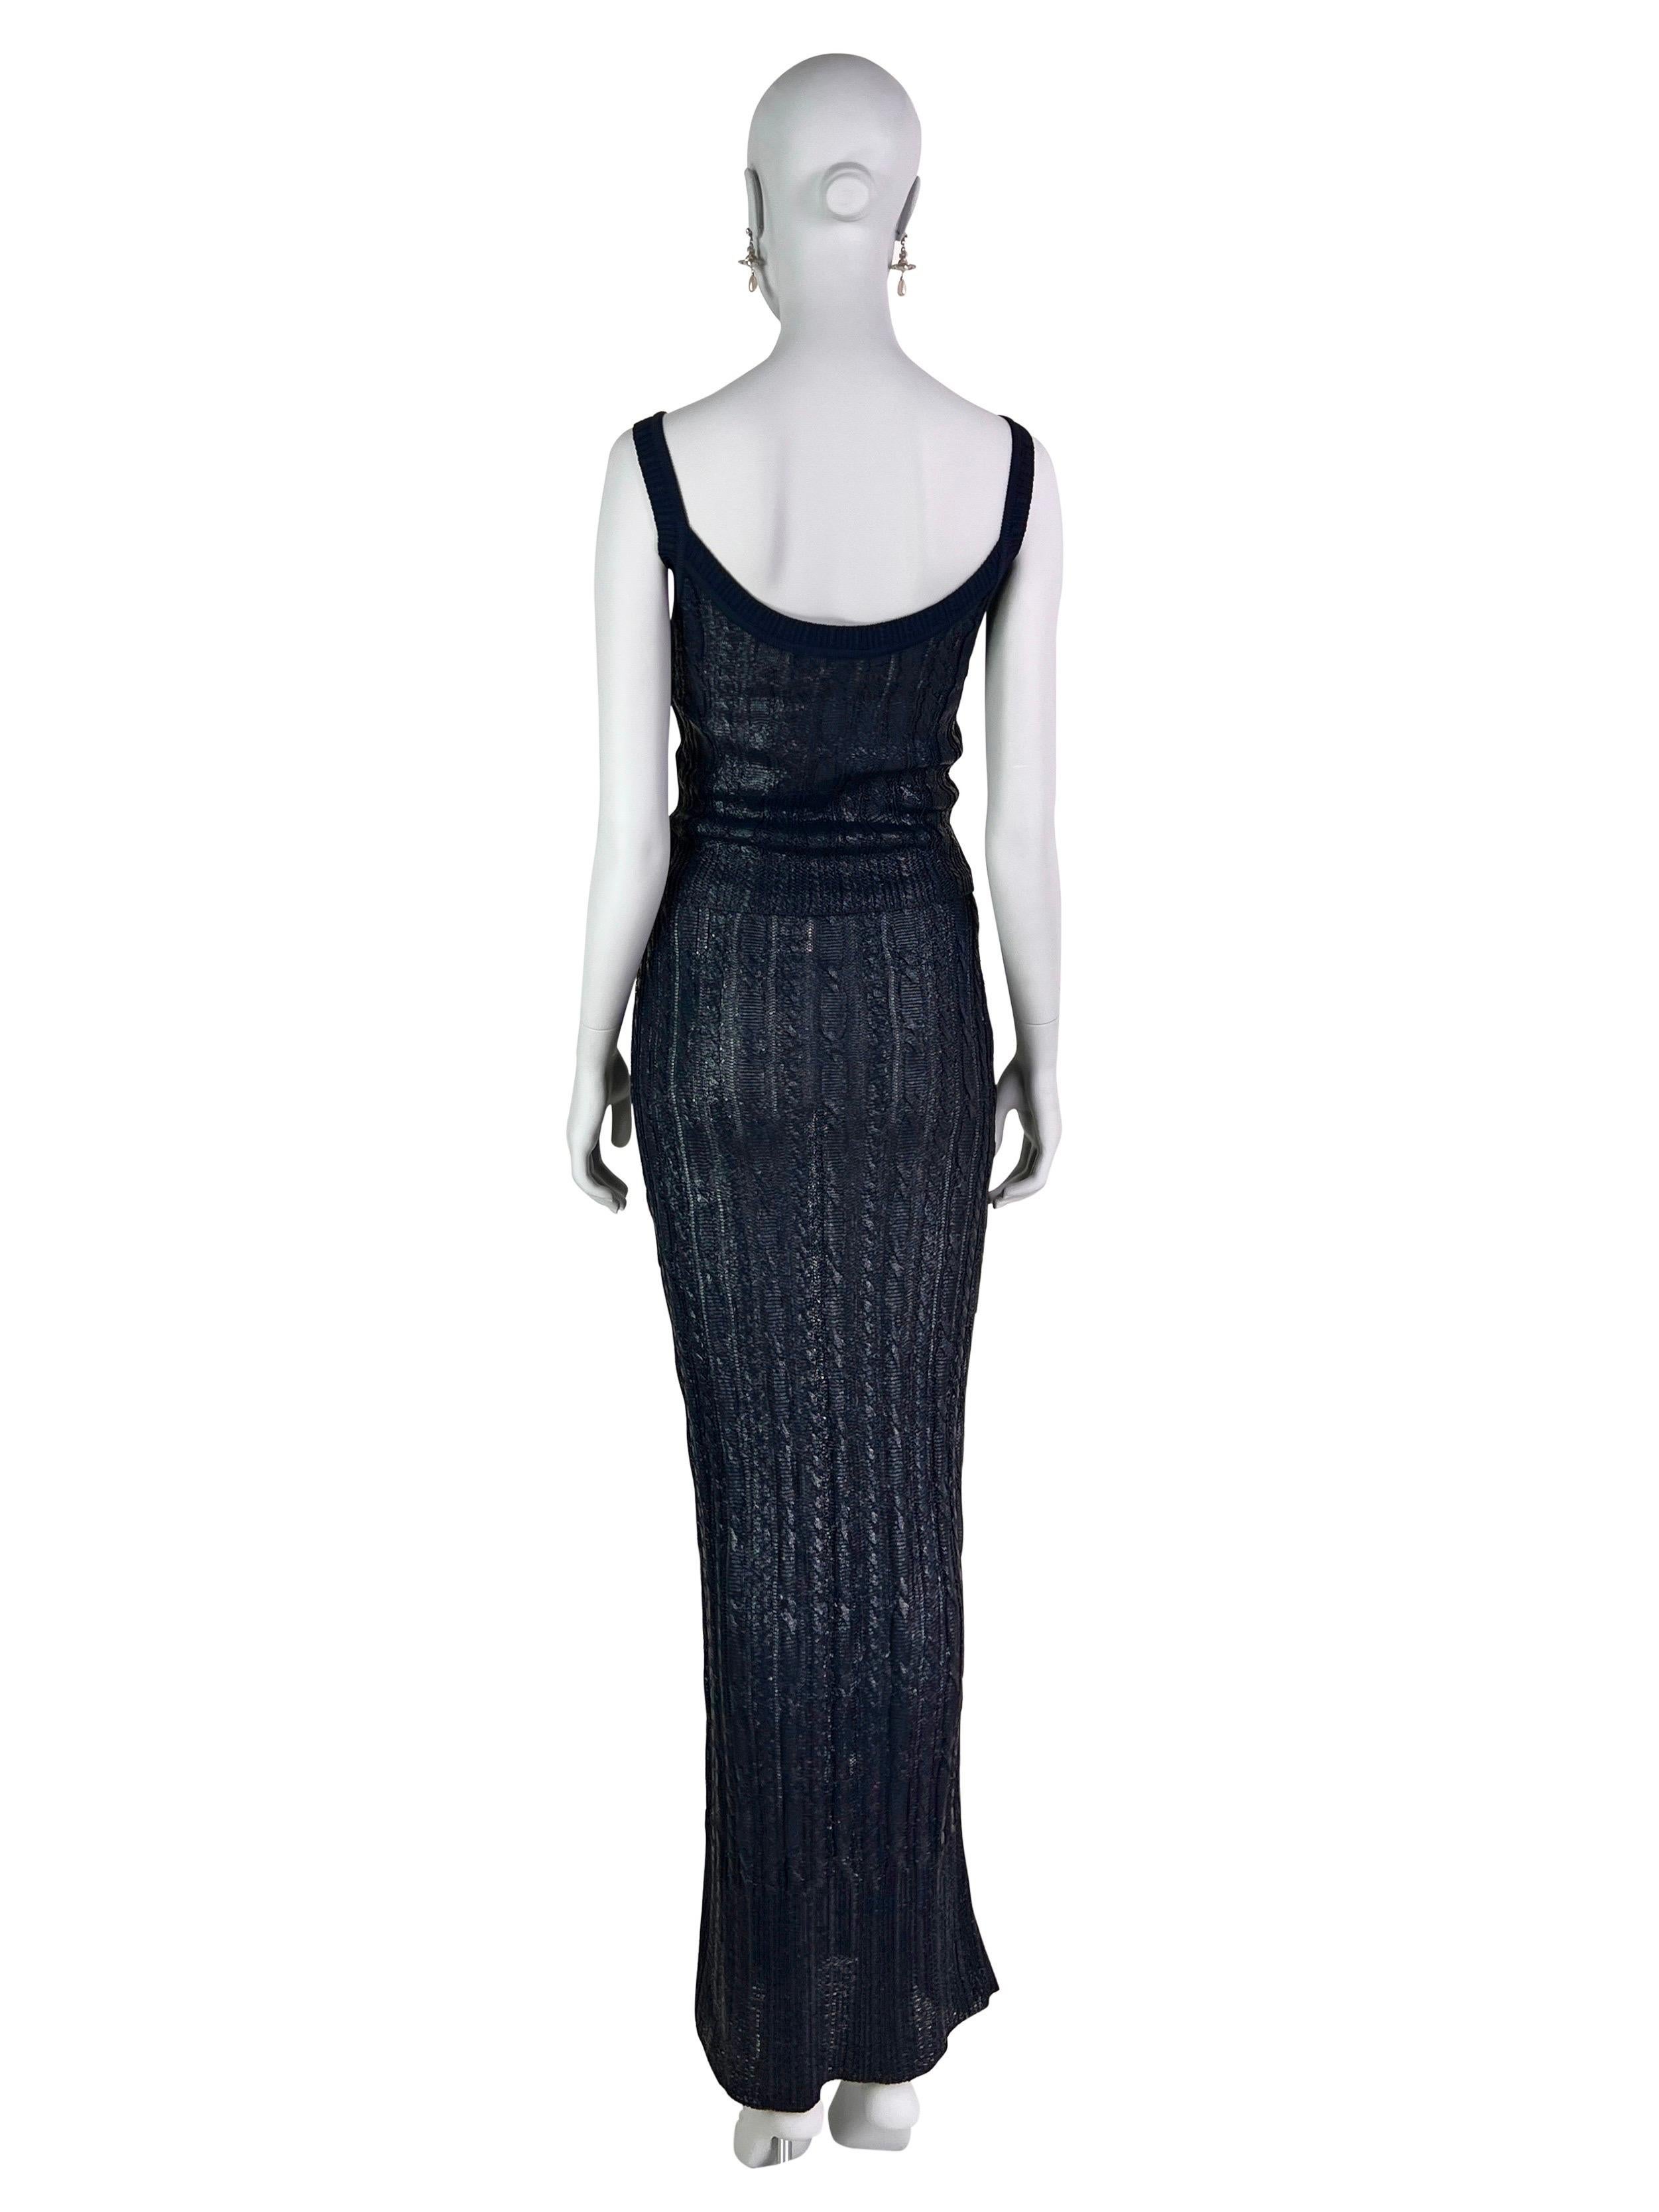 SS 1999 Dior by John Galliano RTW Rubber Knit 3-pieces ensemble For Sale 4